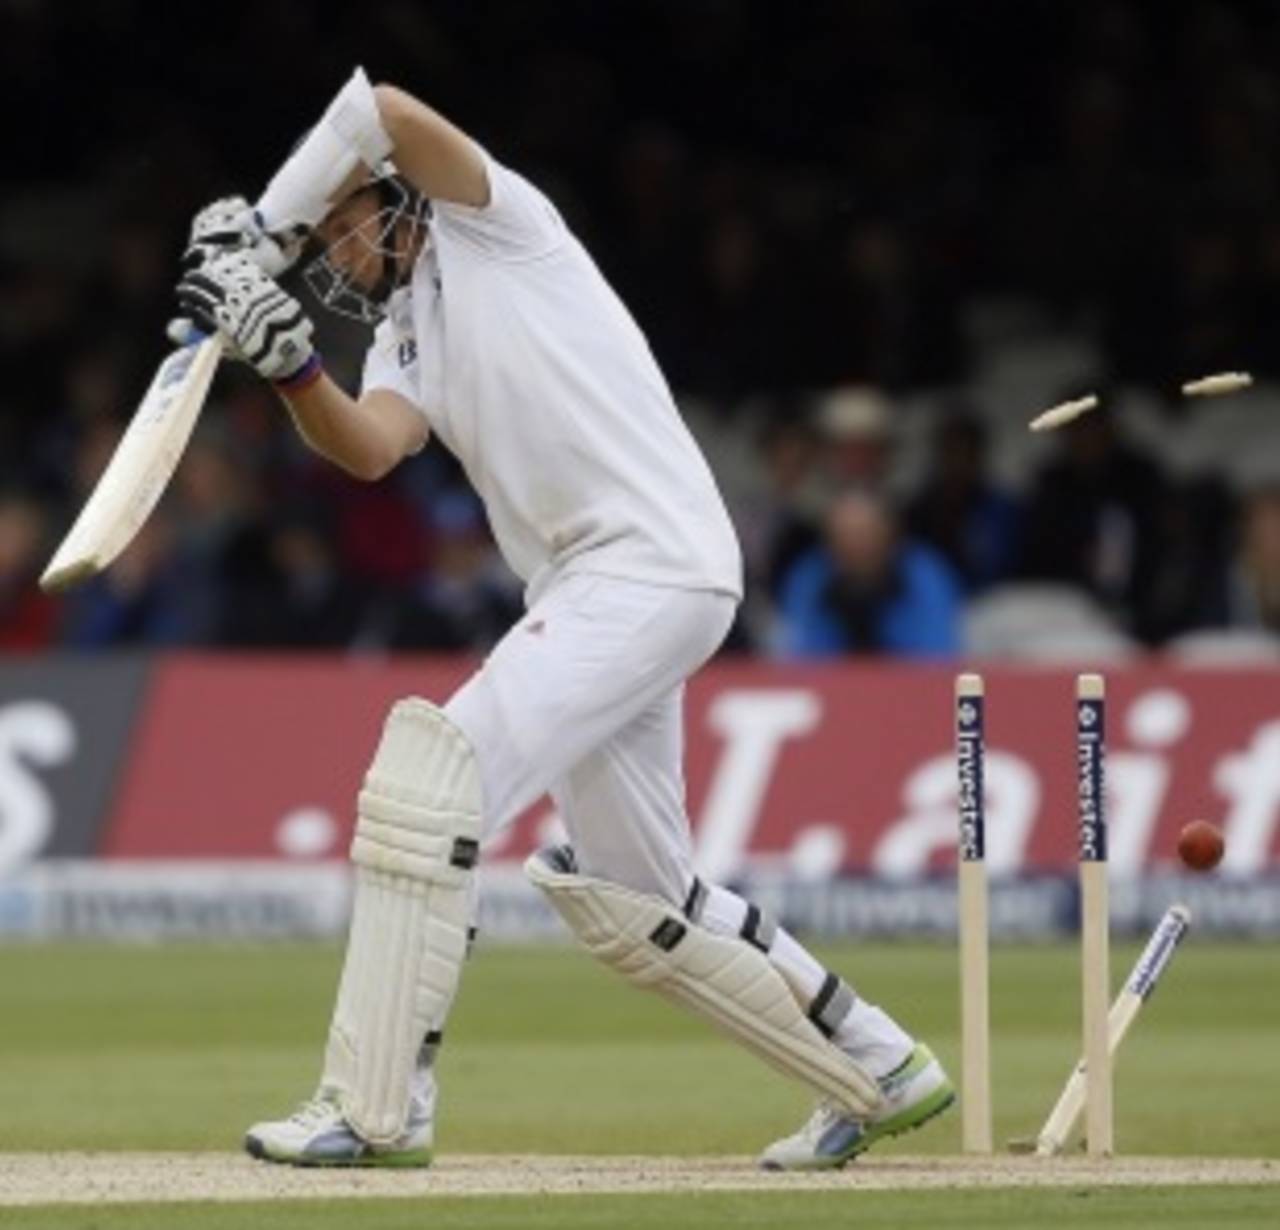 Joe Root misses one and loses his middle stump, England v New Zealand, 1st Investec Test, Lord's, 3rd day, May 18, 2013